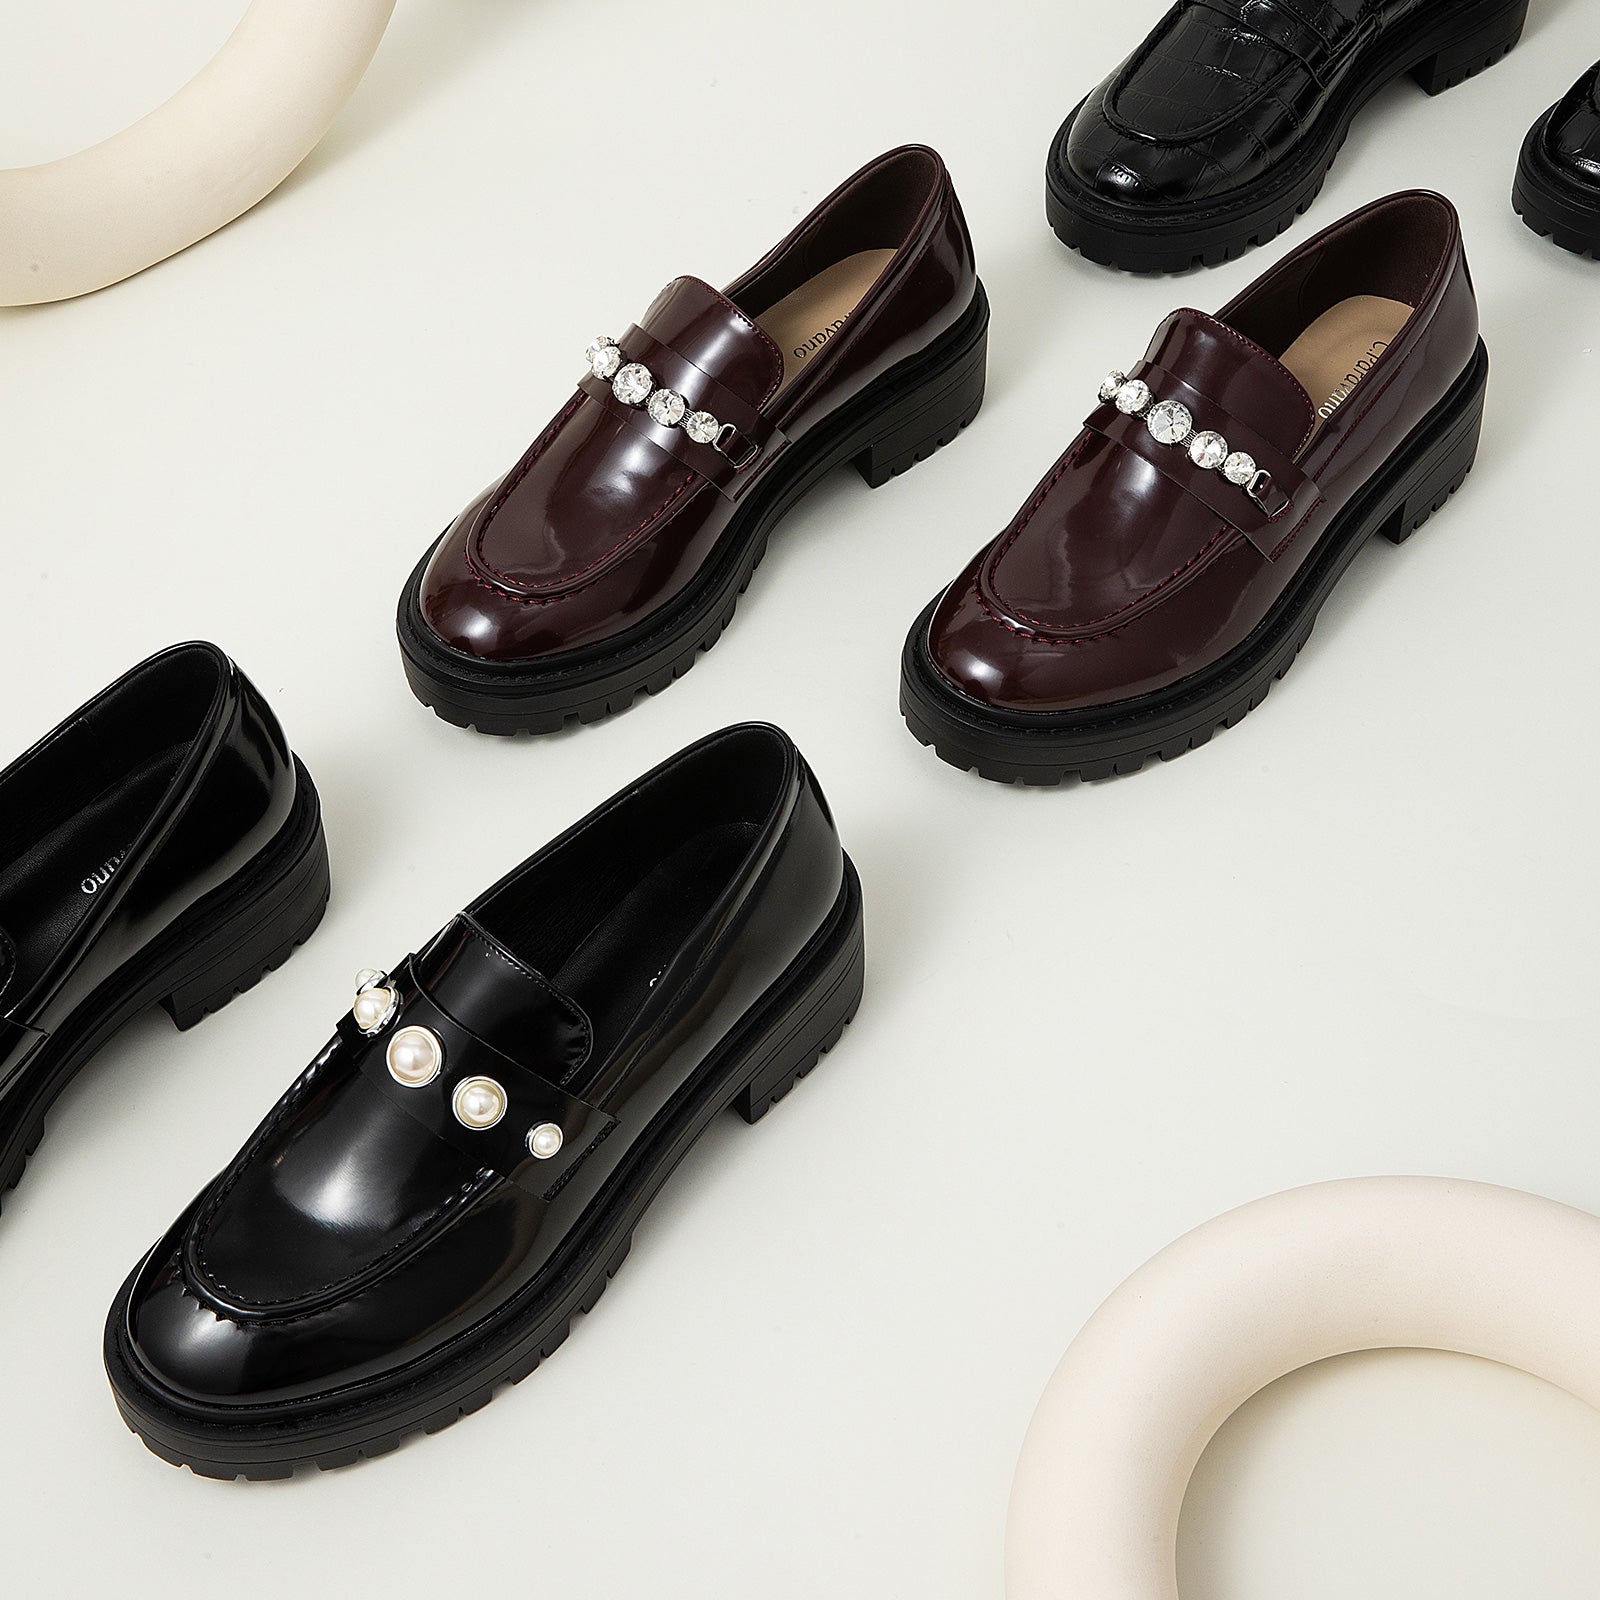 Sleek and Versatile: Pearl Platform Loafers in Black, a timeless and versatile option for everyday elegance